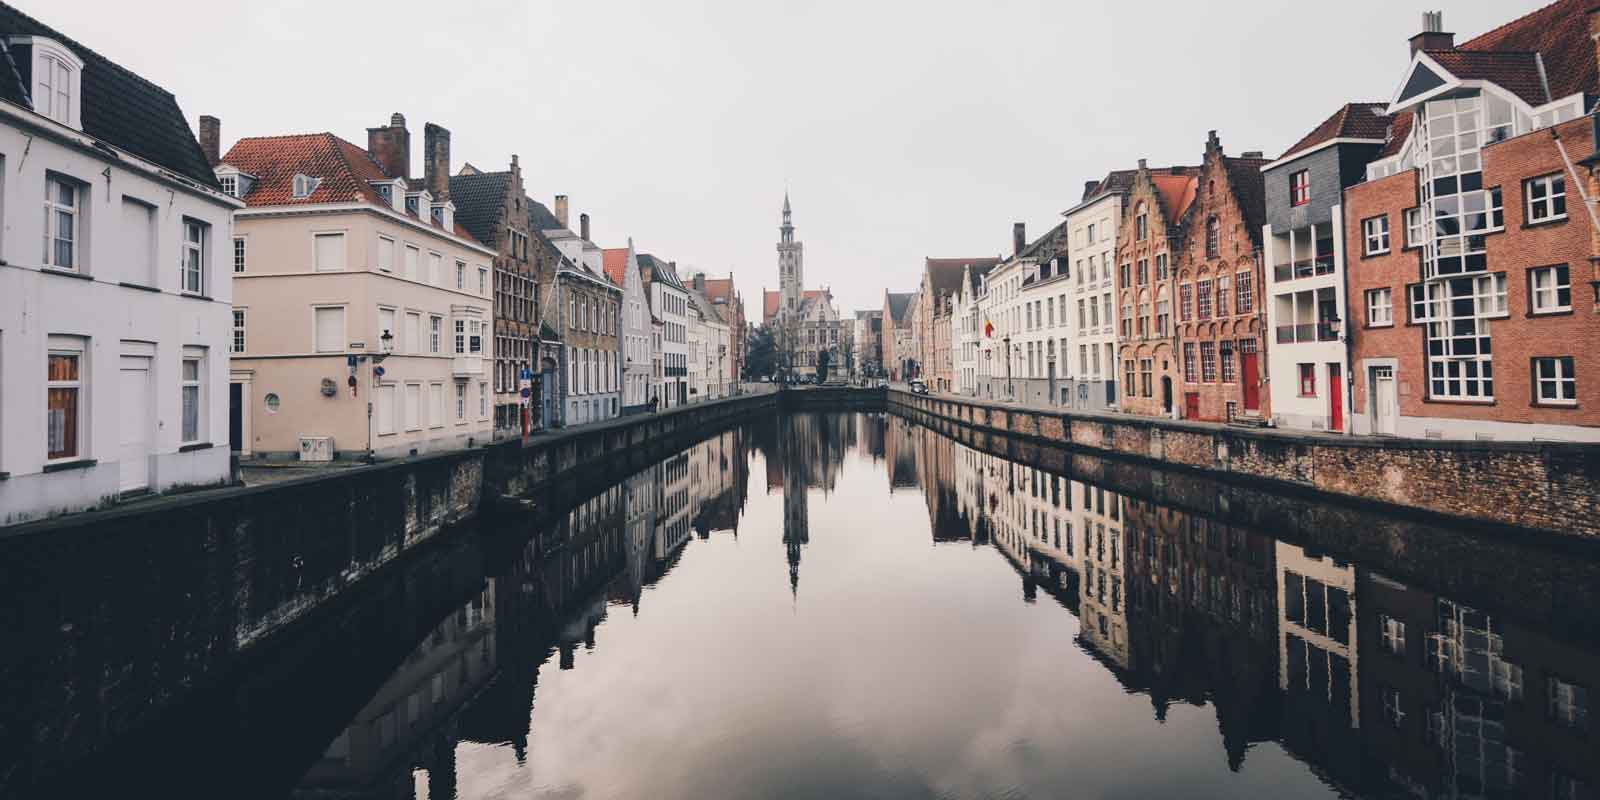 Landscape view of Bruges from the middle of a canal.